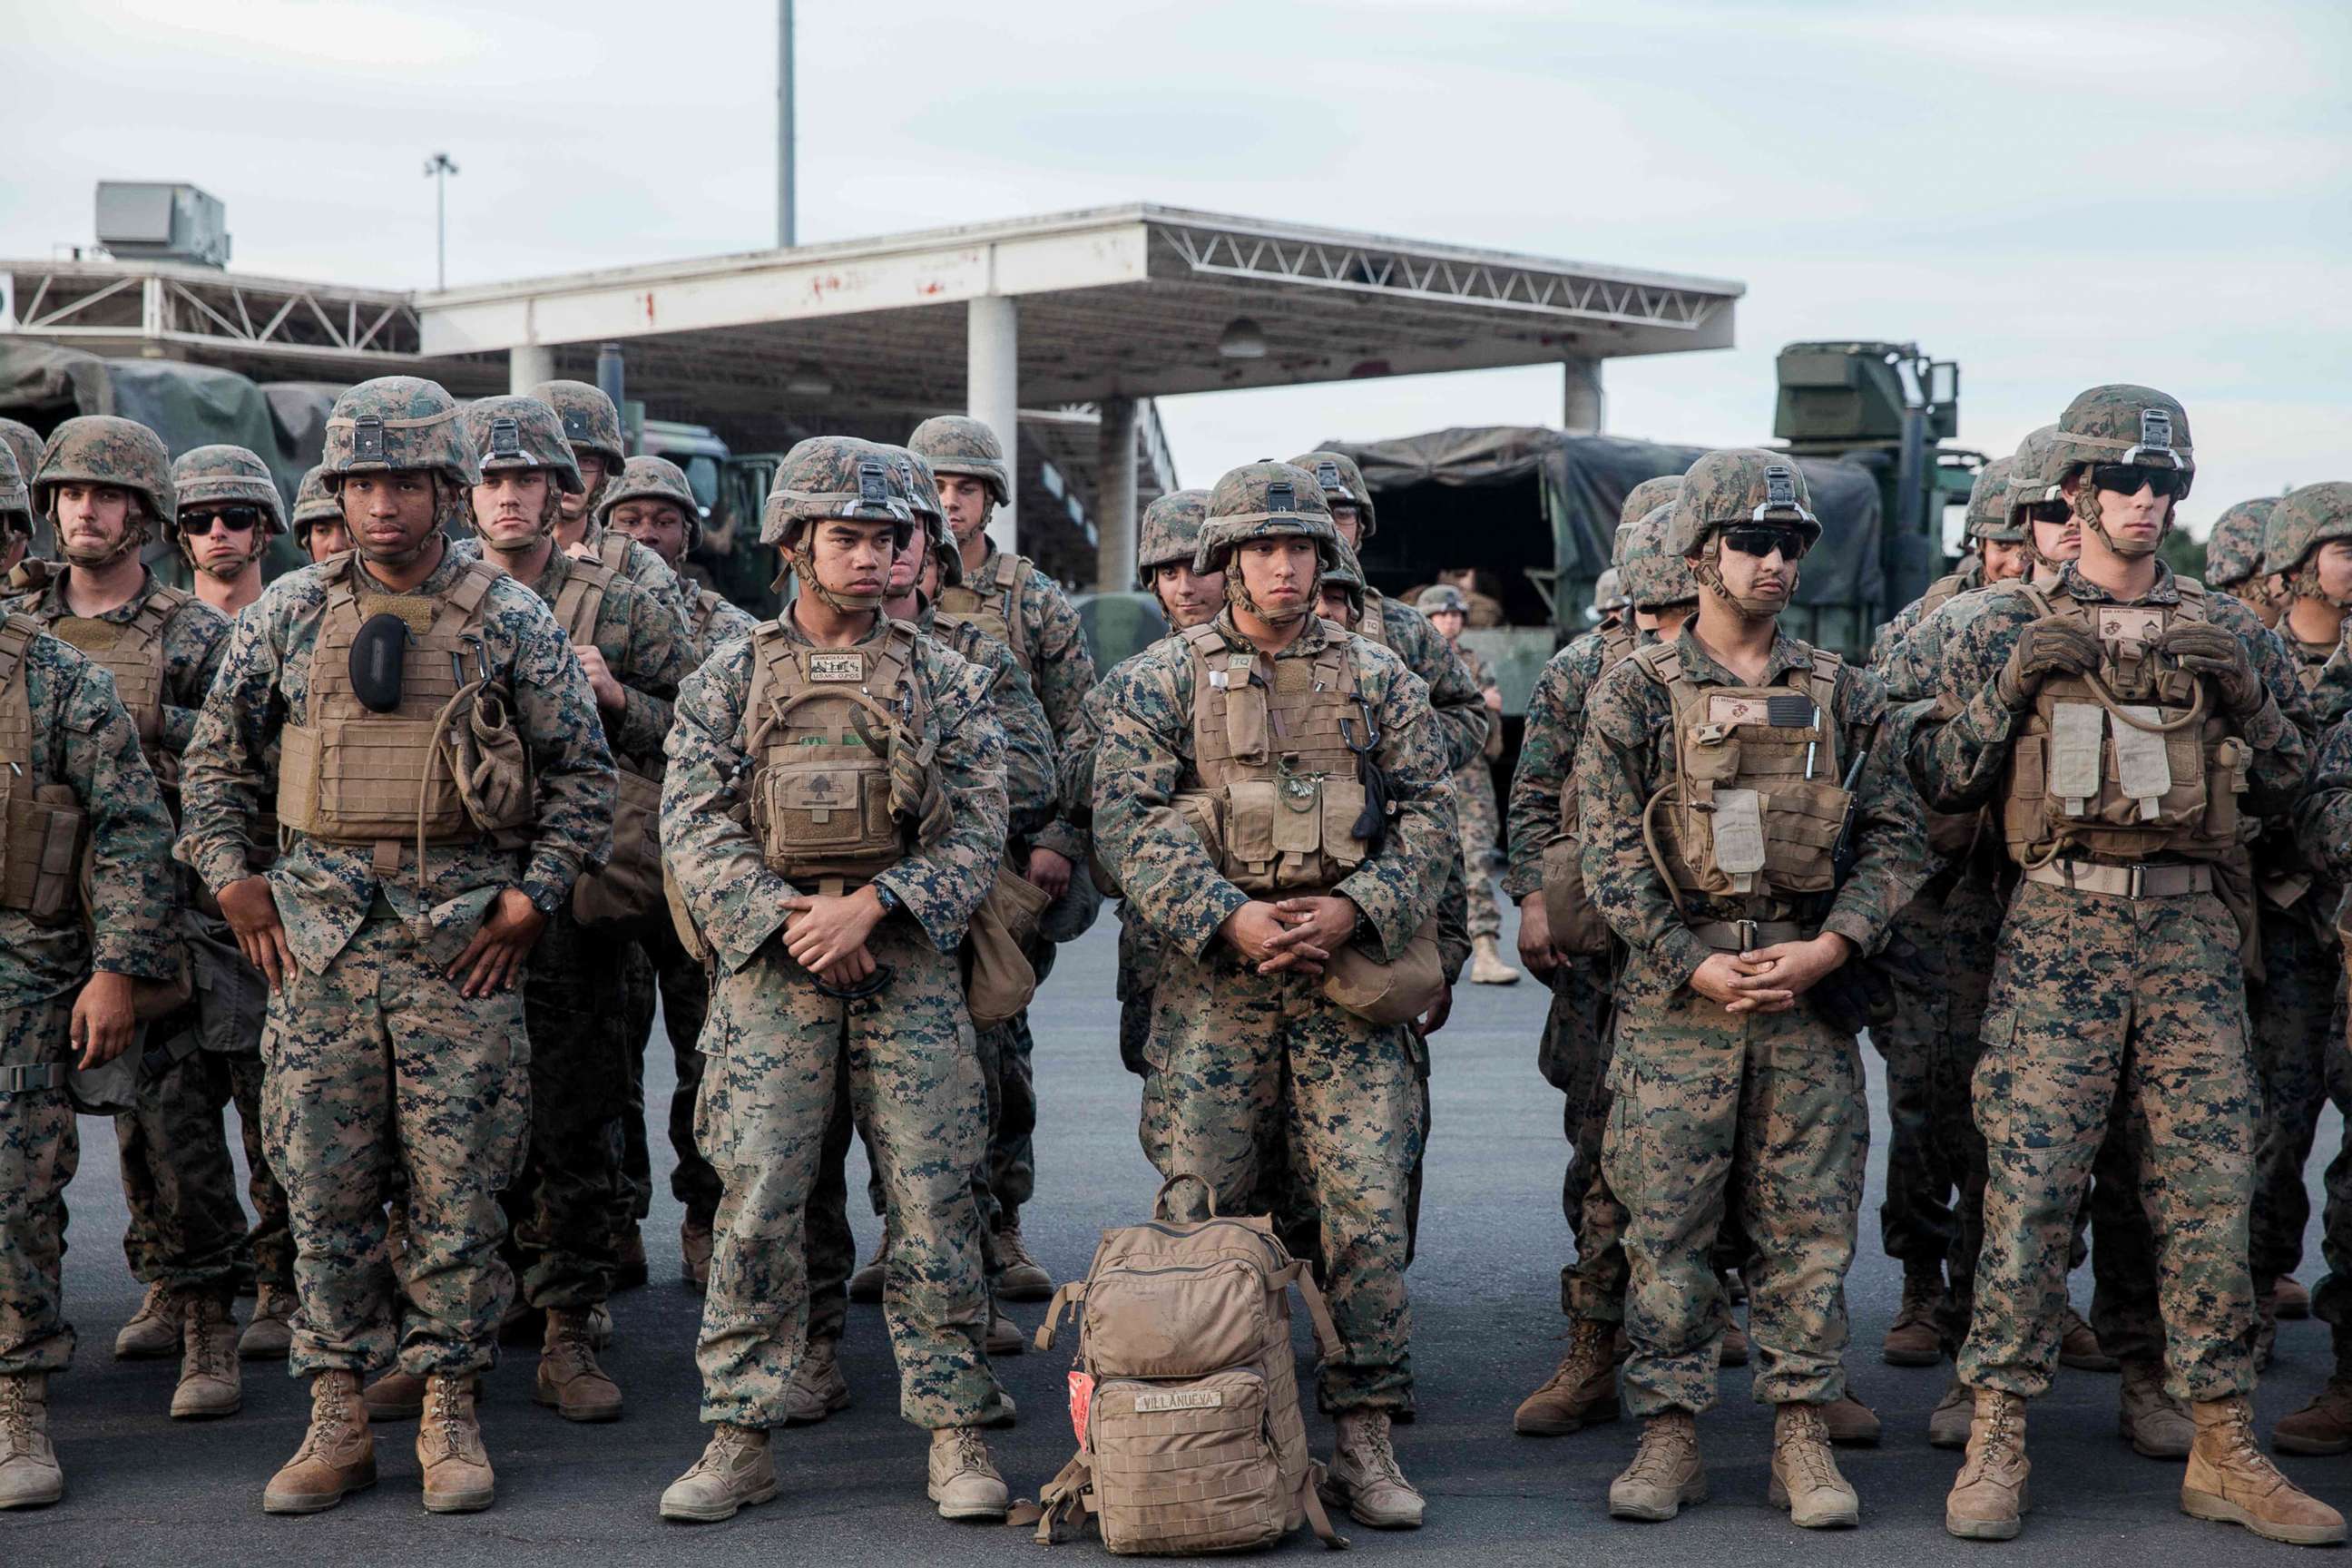 PHOTO: U.S. Military stand in line for a drill near the Otay Mesa Port of Entry, Calif., on Nov. 15, 2018.